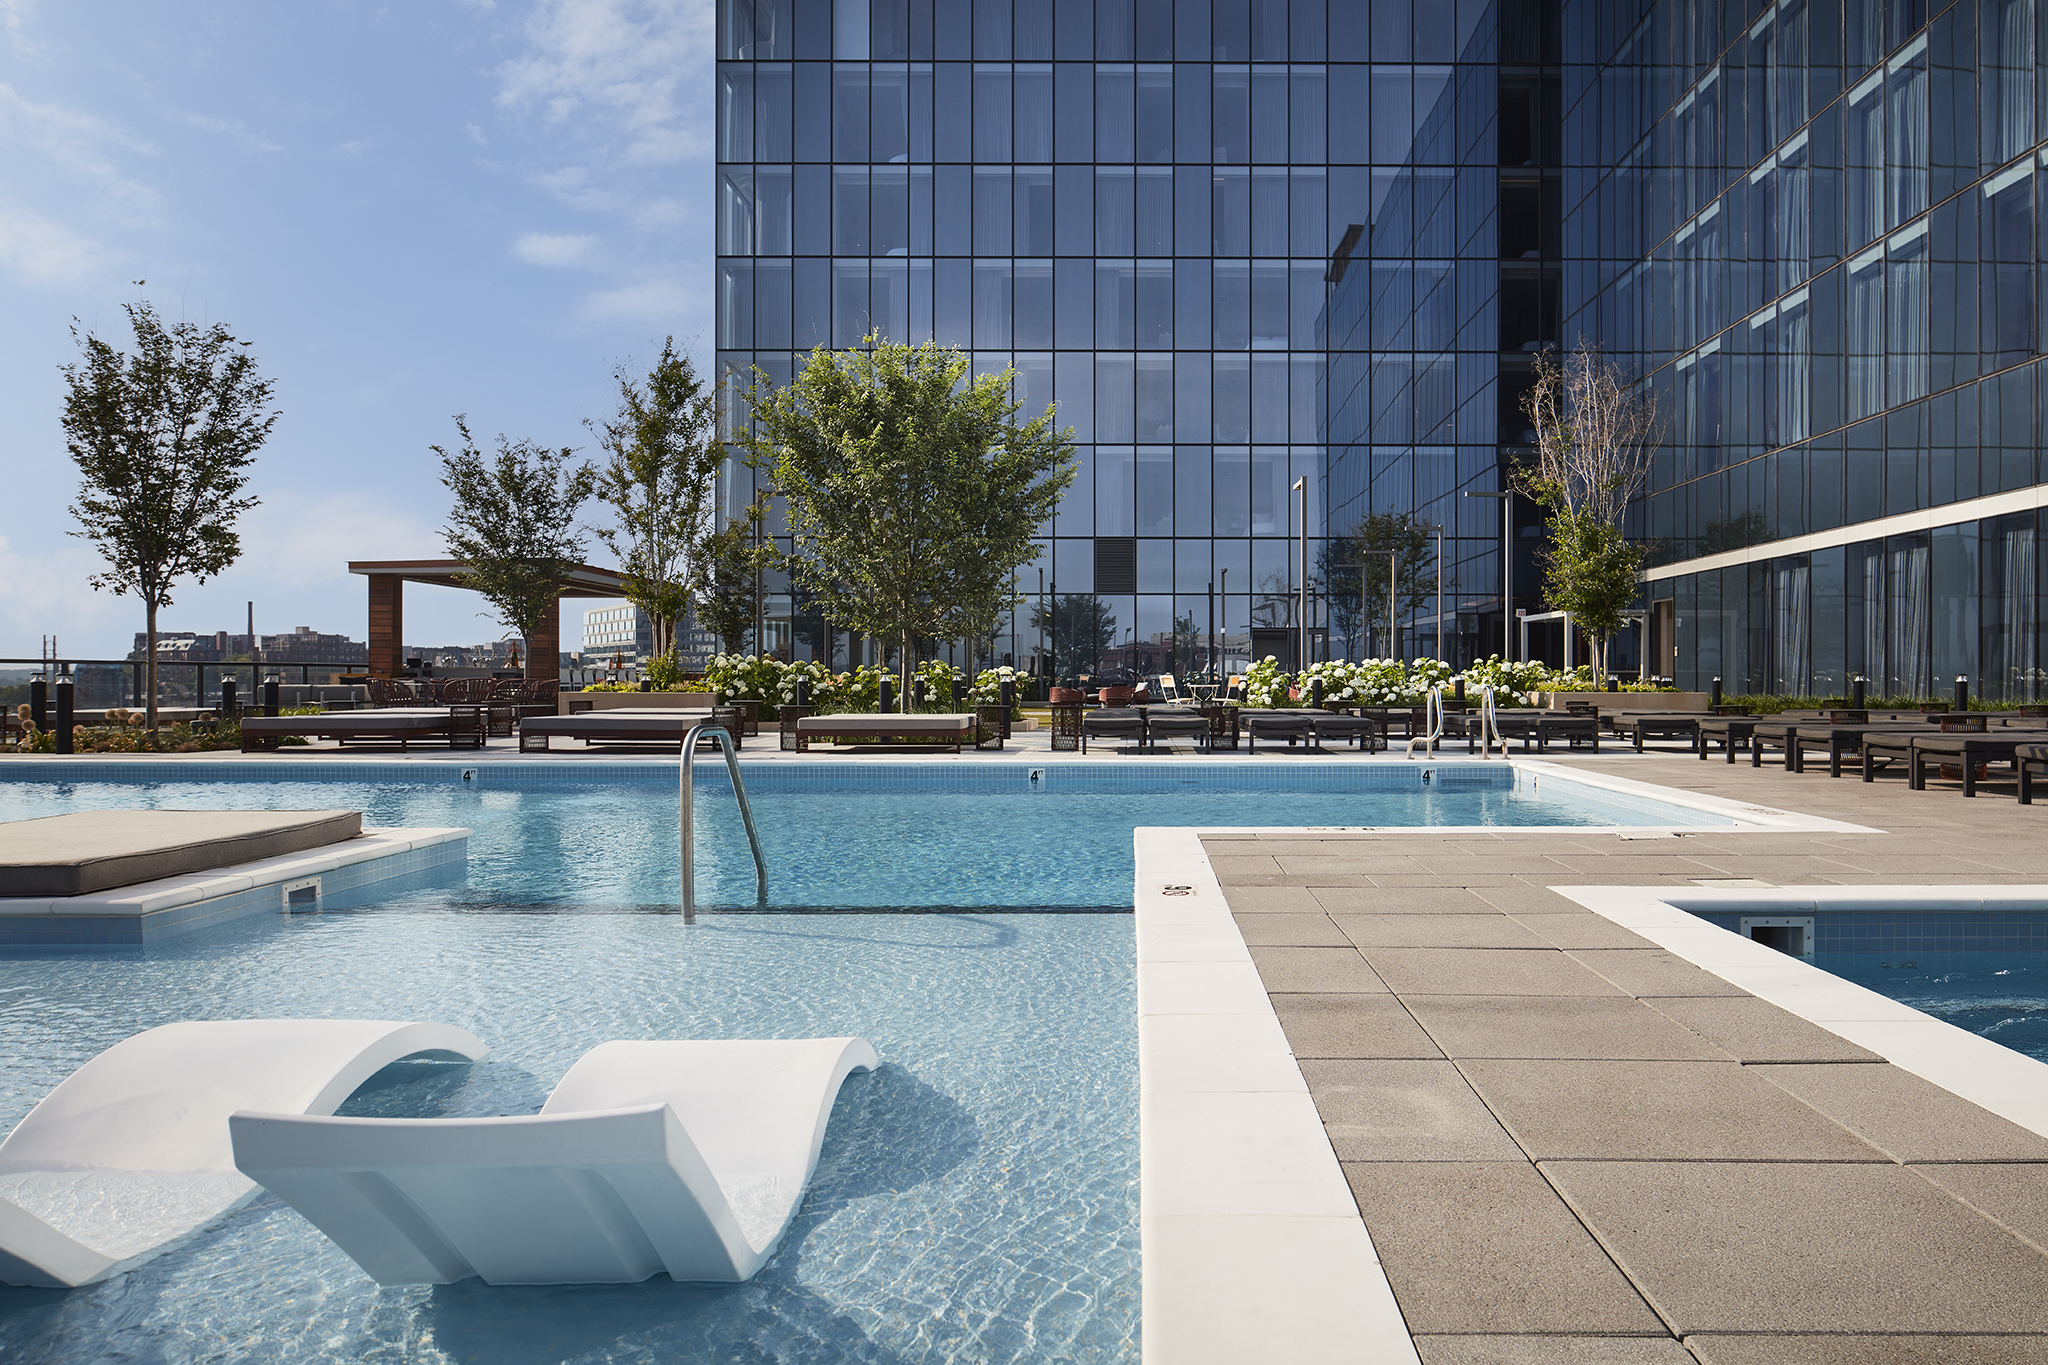 Pool at SCB's Four Seasons Hotel and Private Residences. Architecture. Hospitality. Mixed-use. Retail. Residential.